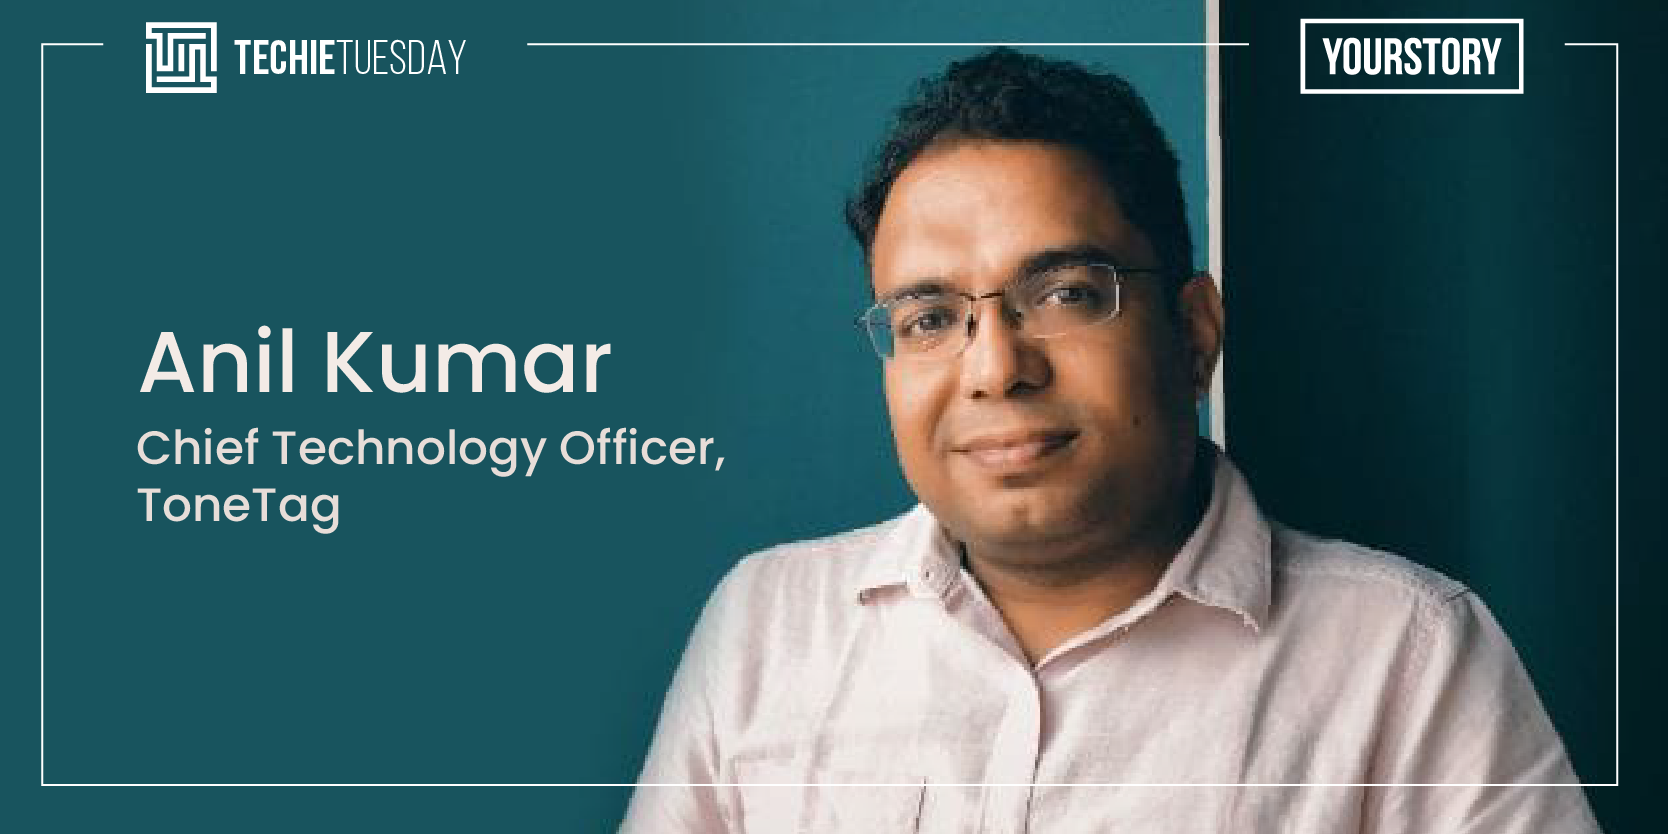 [Techie Tuesday] How software came into ToneTag CTO Anil Kumar’s life unexpectedly, and became the great love of his life